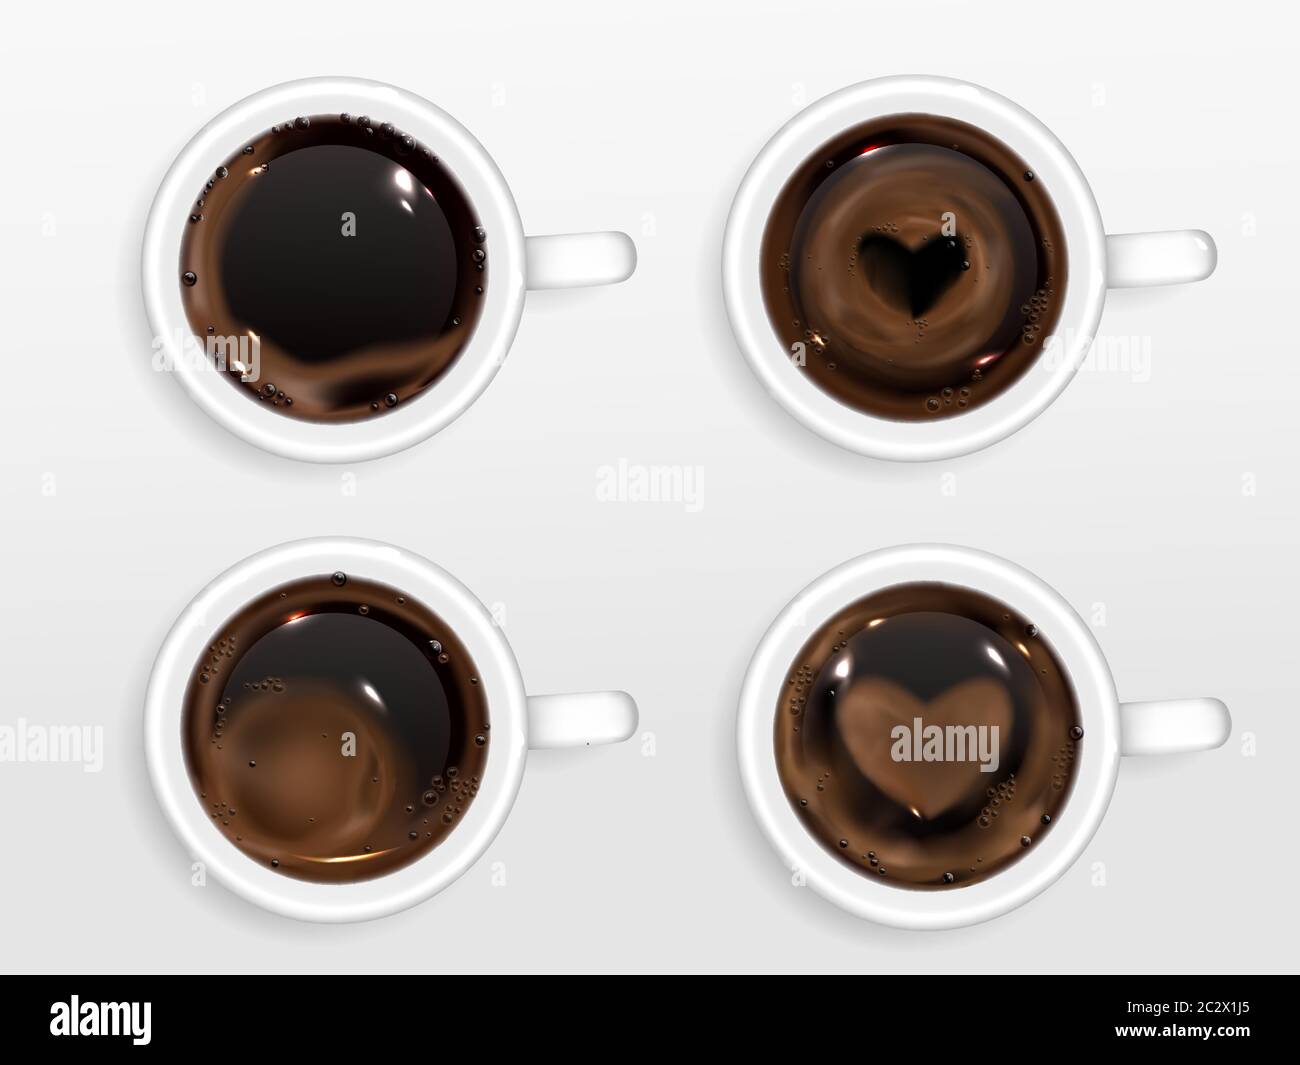 https://c8.alamy.com/comp/2C2X1J5/cups-of-coffee-with-heart-shape-from-cream-foam-vector-realistic-set-of-hot-espresso-cappuccino-in-mugs-with-latte-art-isolated-on-white-background-2C2X1J5.jpg